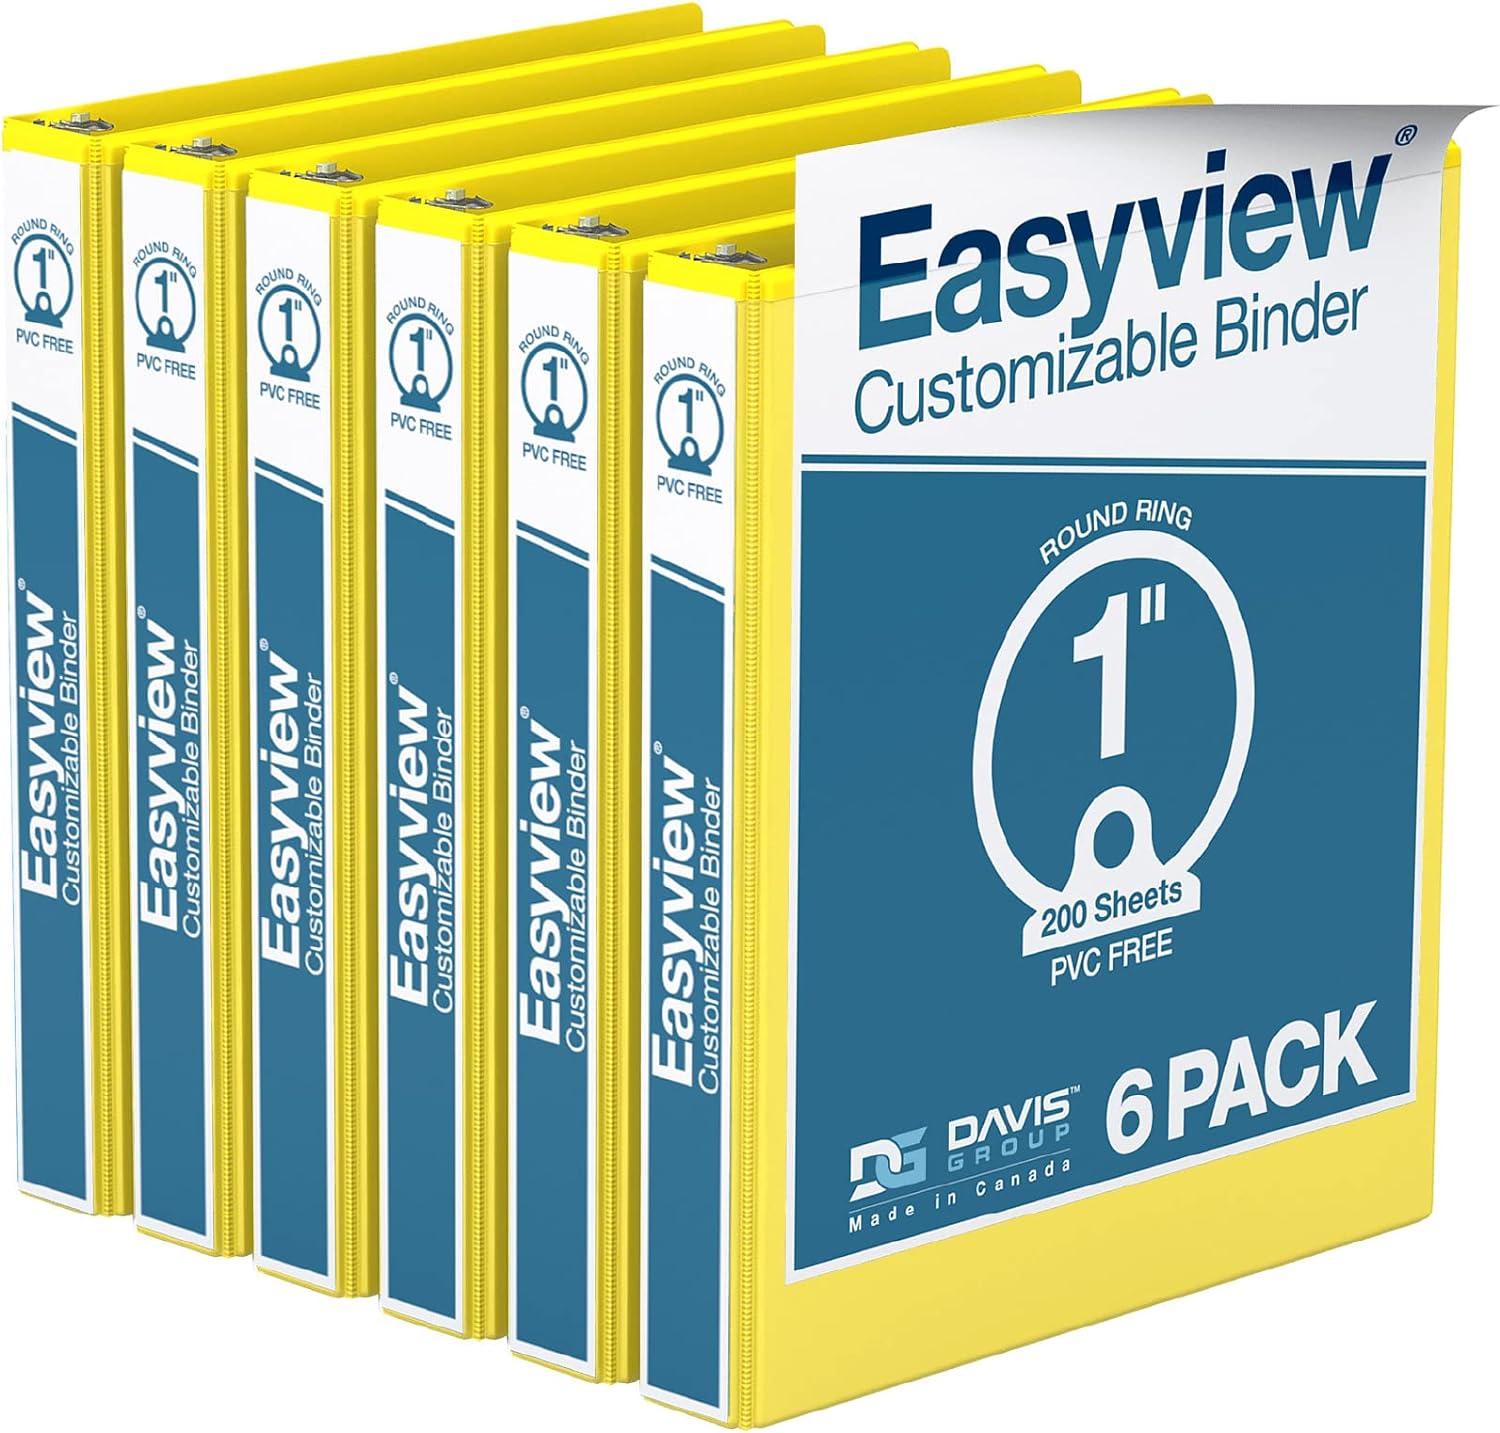 davis group easyview premium 1-inch binders with clear-view covers 3-ring binders for schoolpack of 6 round